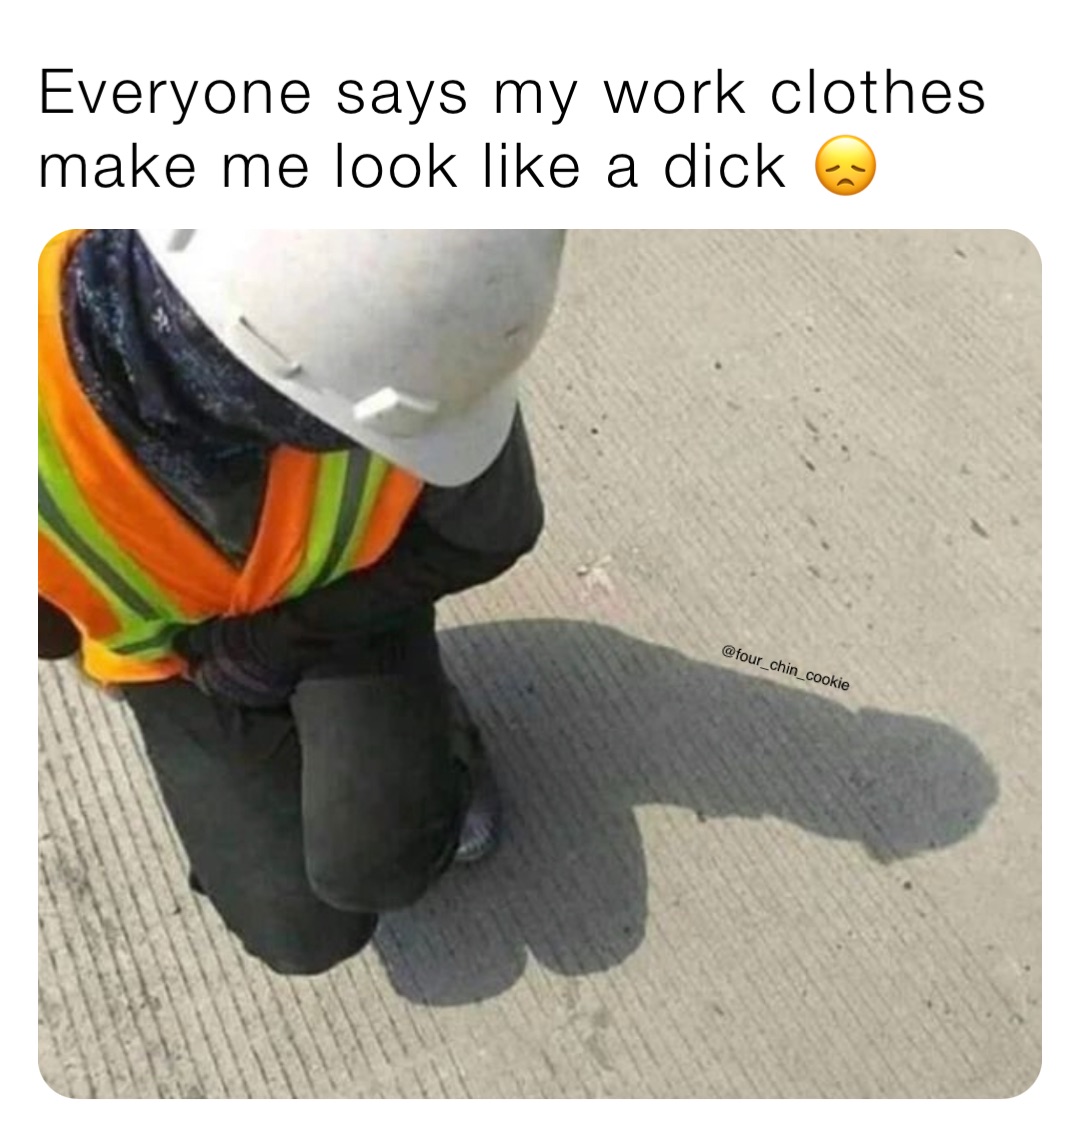 Everyone says my work clothes make me look like a dick 😞